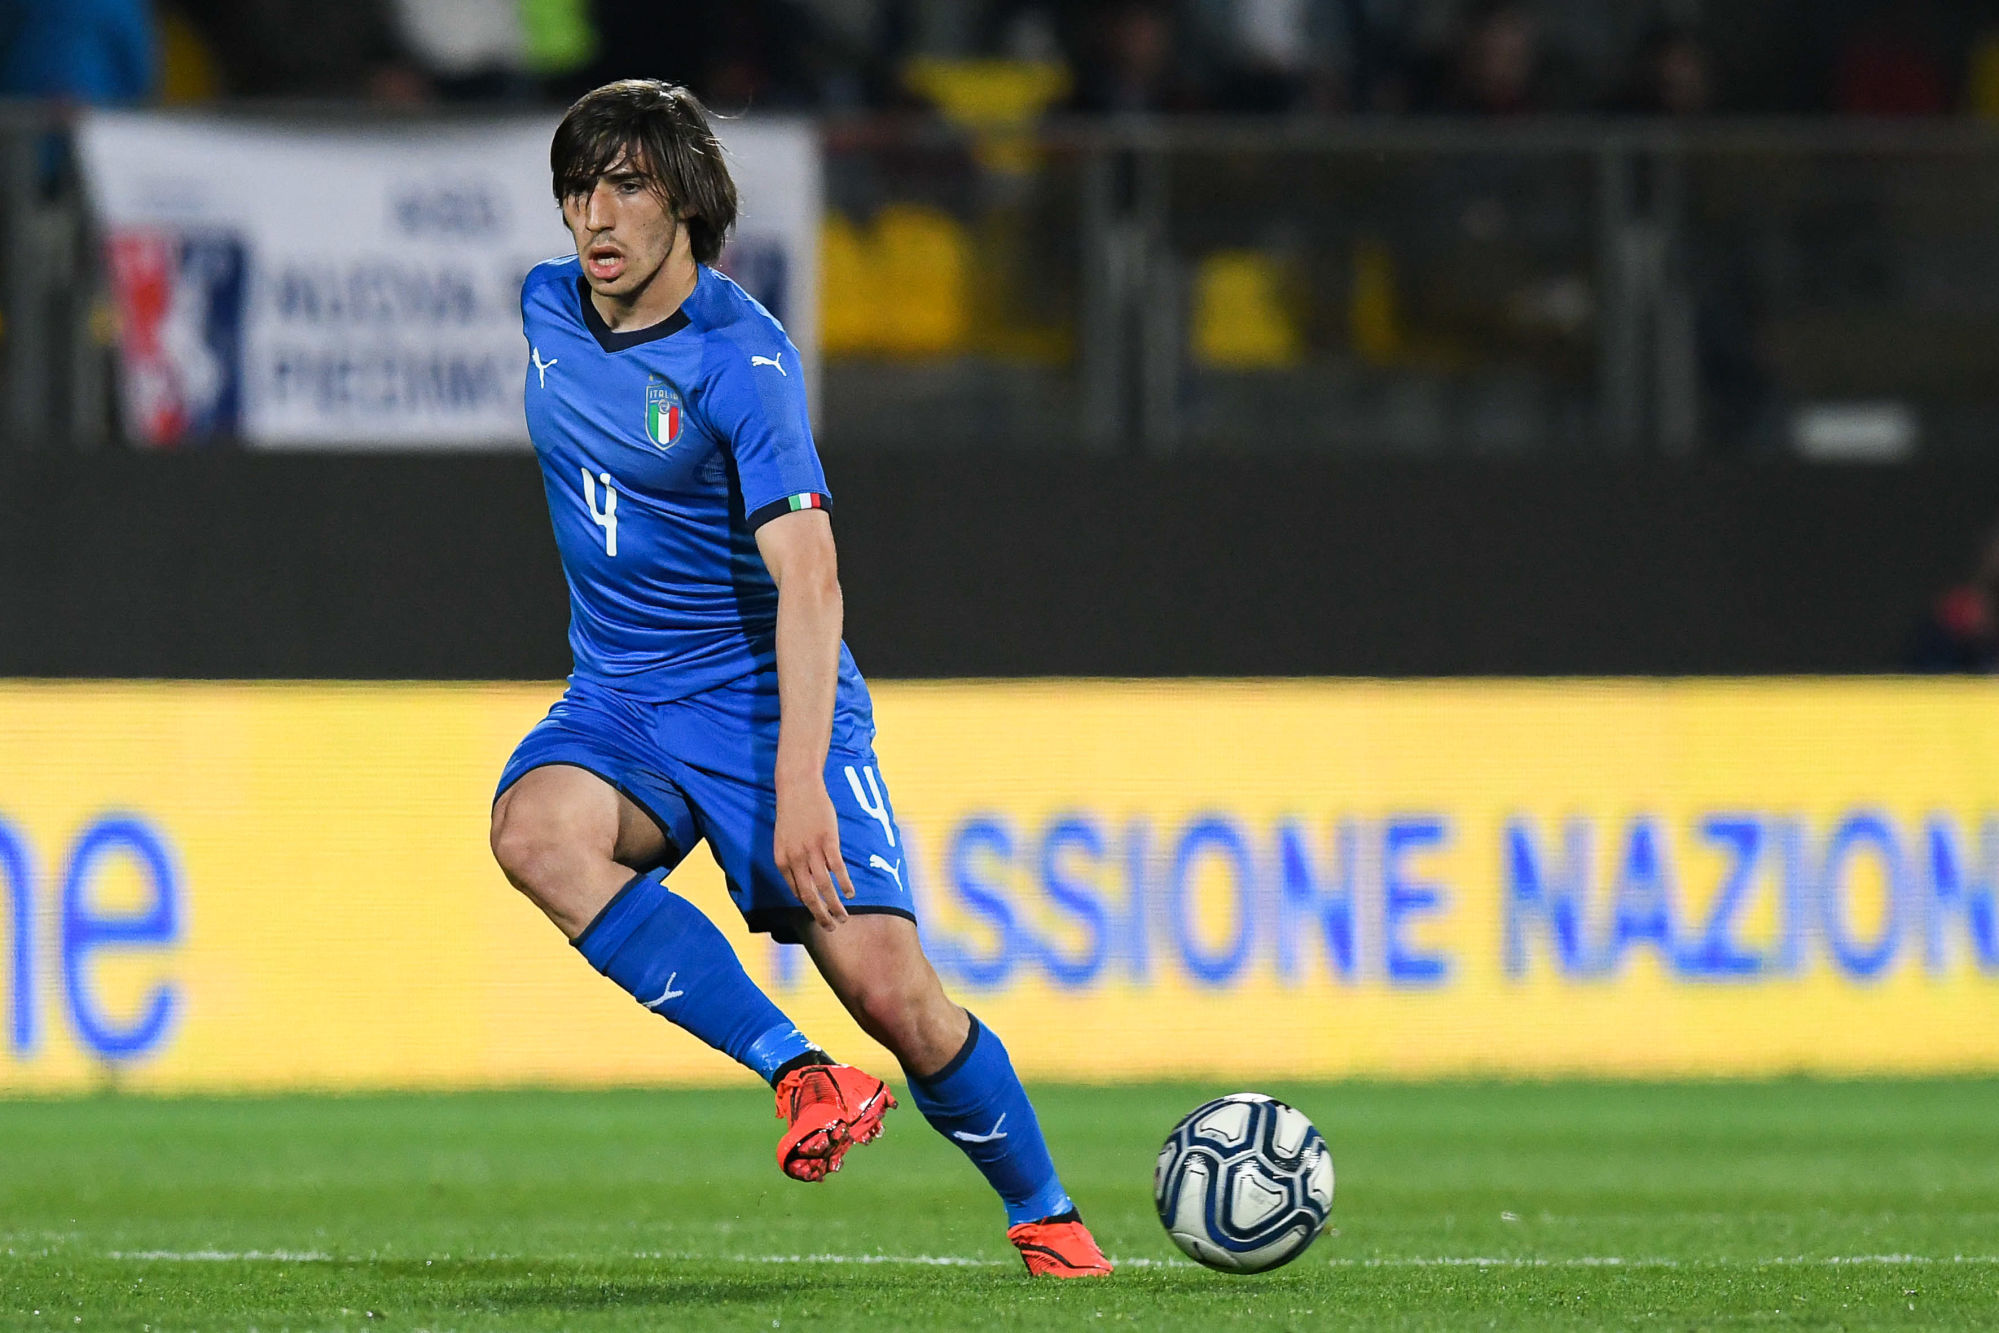 Sandro Tonali during the friendly match between U21 Italy and U21 Croatia on march 25th, 2019.
Photo : Ipp / Icon Sport